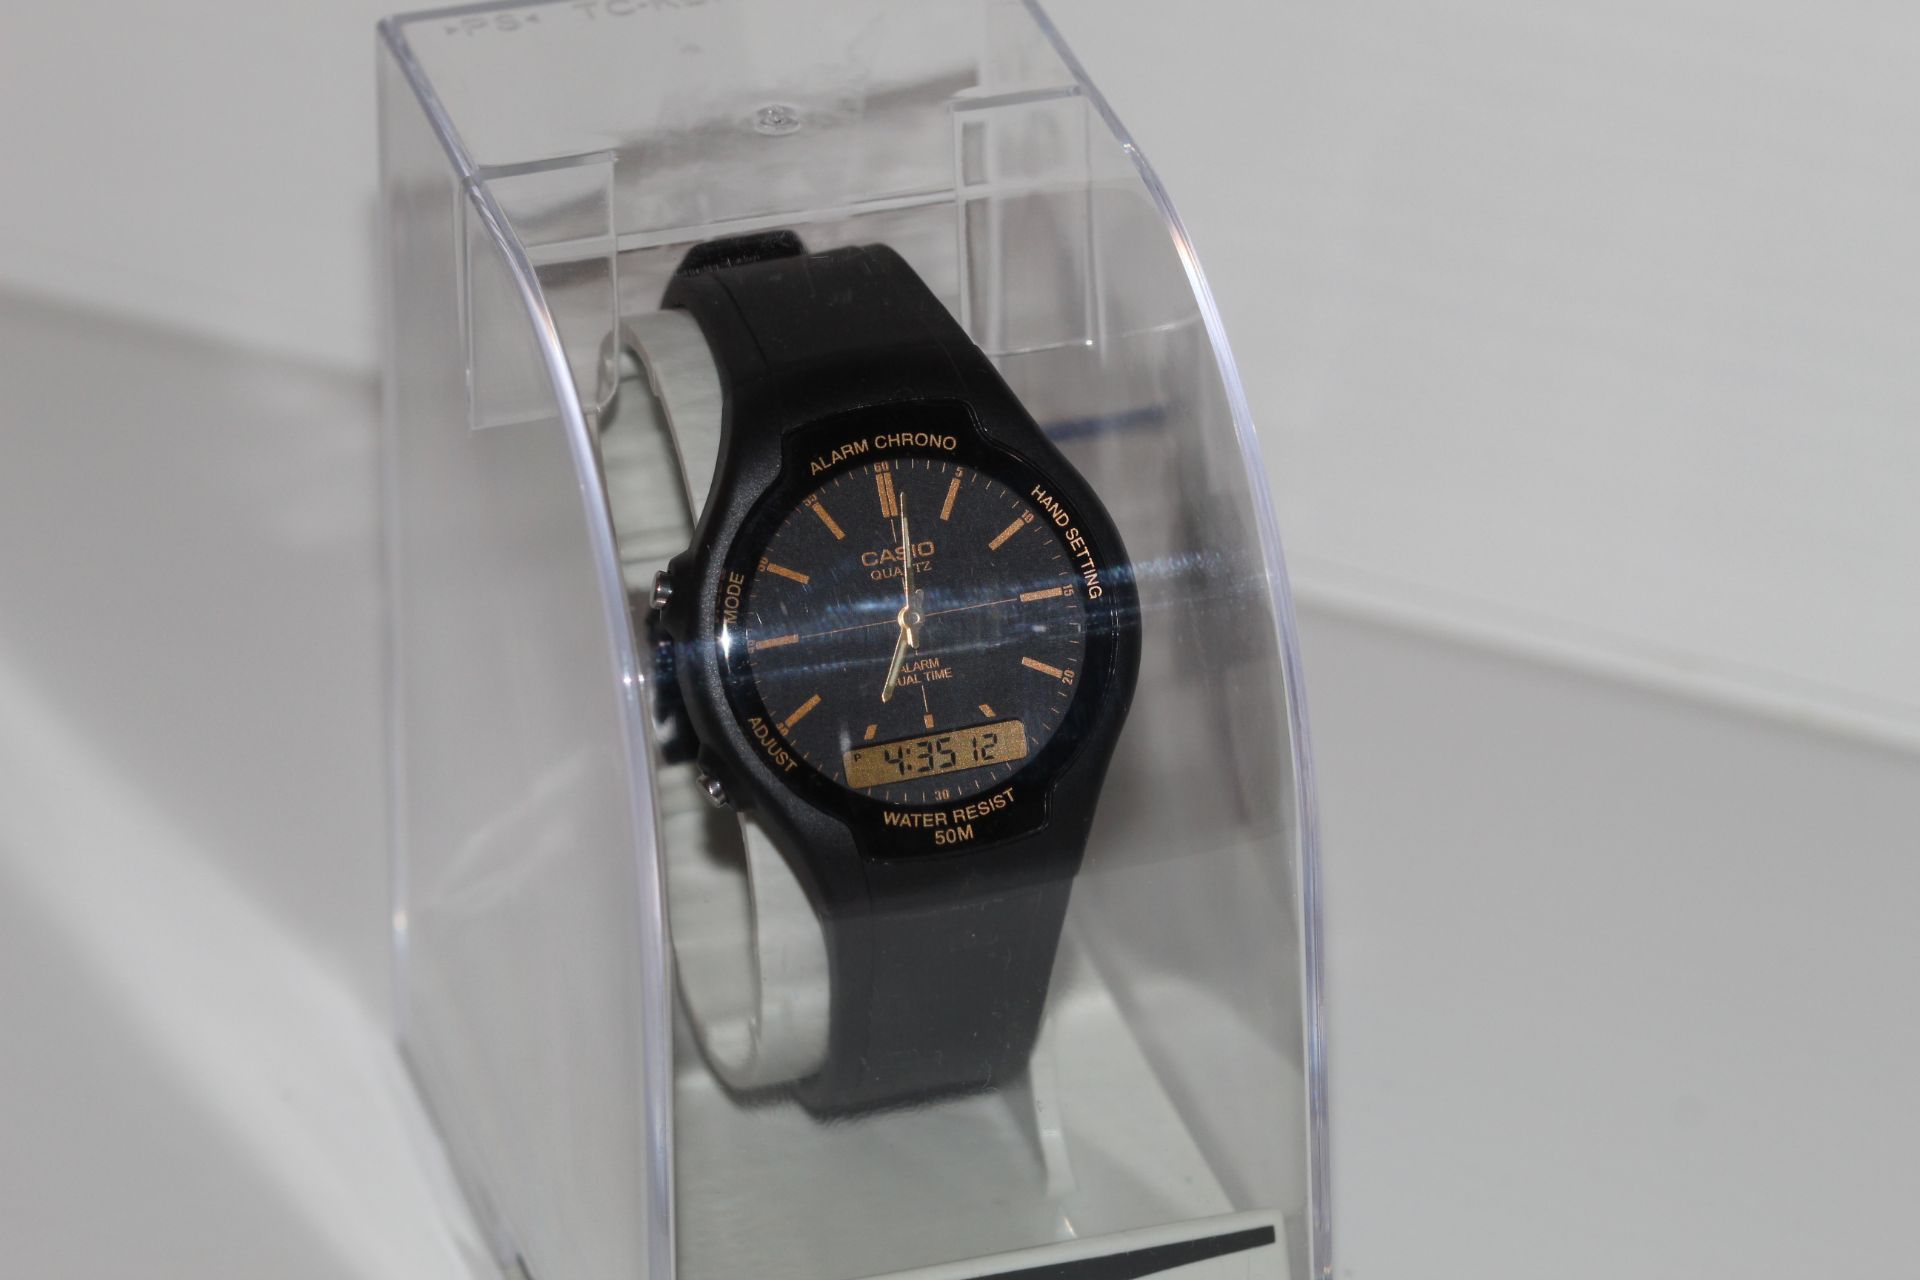 Casio dual time watch - Image 3 of 3